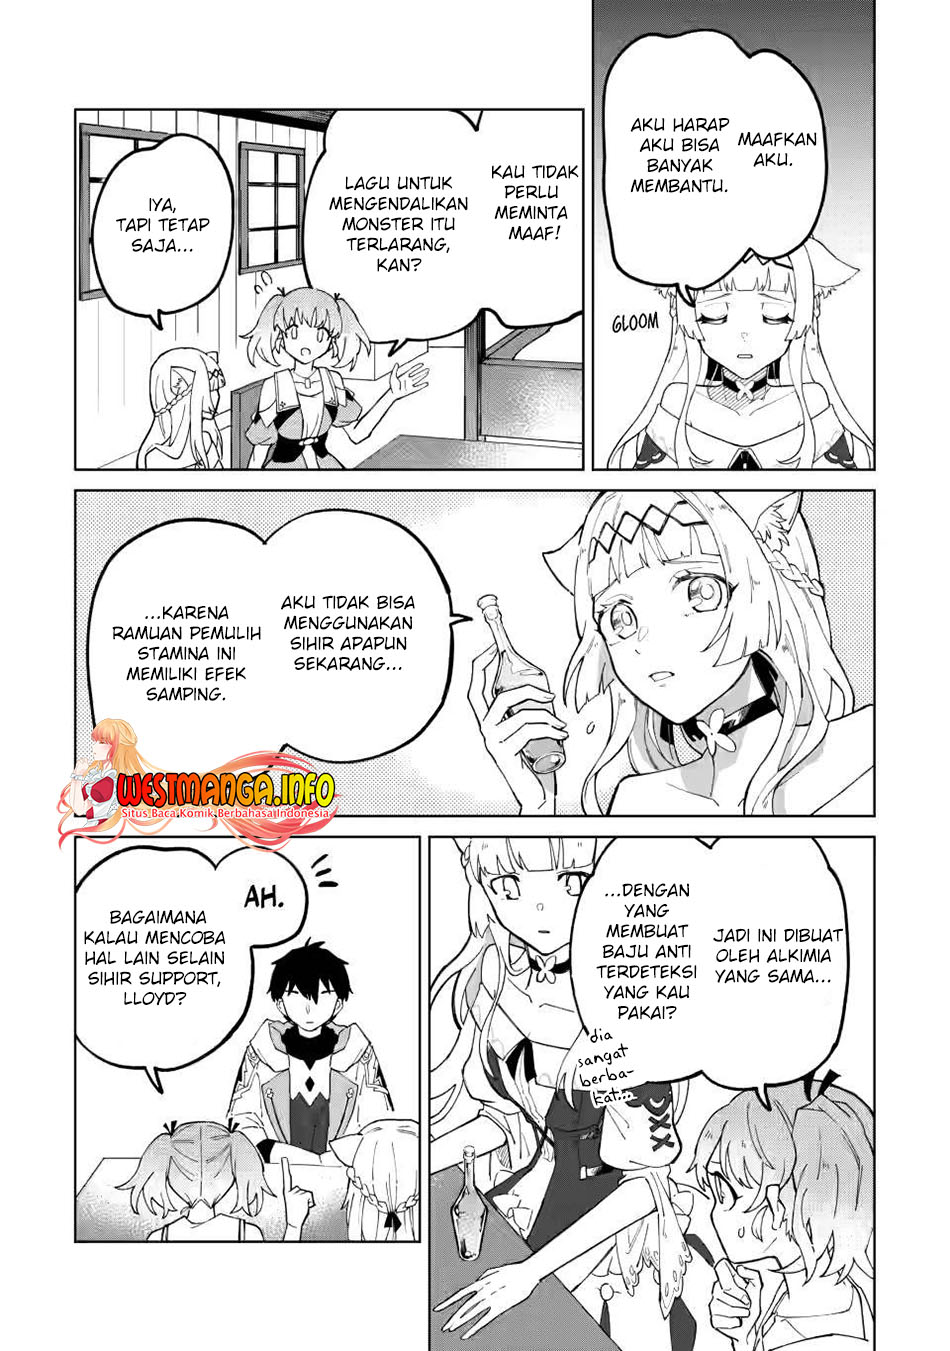 The White Mage Who Was Banished From the Hero’s Party Is Picked up by an S Rank Adventurer ~ This White Mage Is Too Out of the Ordinary! Chapter 13